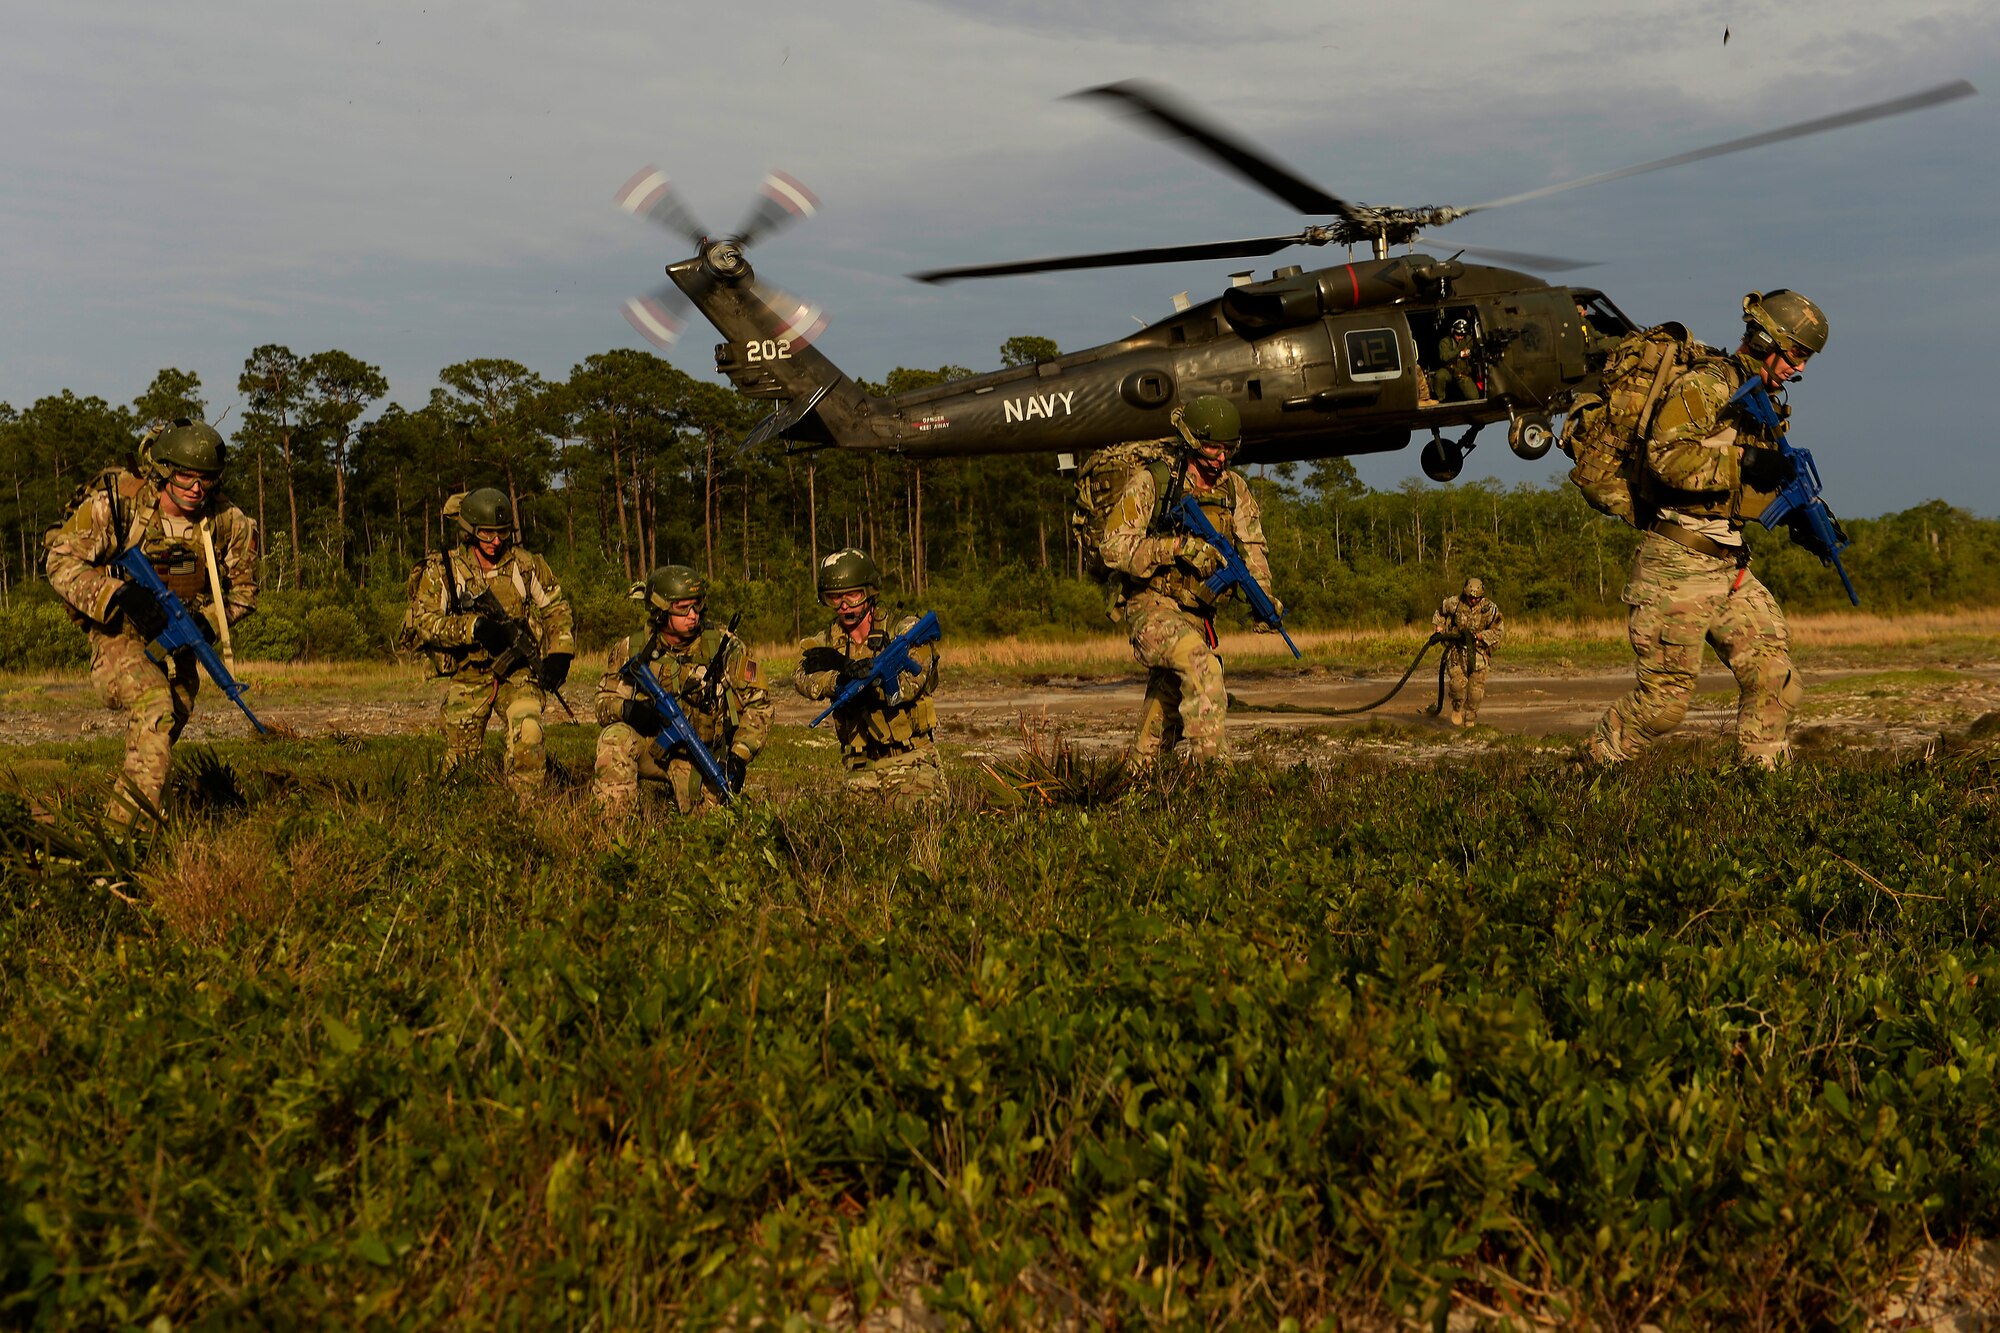 Combat controllers conduct fast-rope insertion training using a U.S. Navy HH-60H Seahawk helicopter assigned to Helicopter Sea Combat Squadron 84 at Hurlburt Field, Fla., May 2, 2014, during Emerald Warrior 2014. Emerald Warrior is a U.S. Special Operations Command-sponsored two-week joint/combined tactical exercise designed to provide realistic military training in an urban setting. (U.S. Air Force photo/Staff Sgt. Tim Chacon)